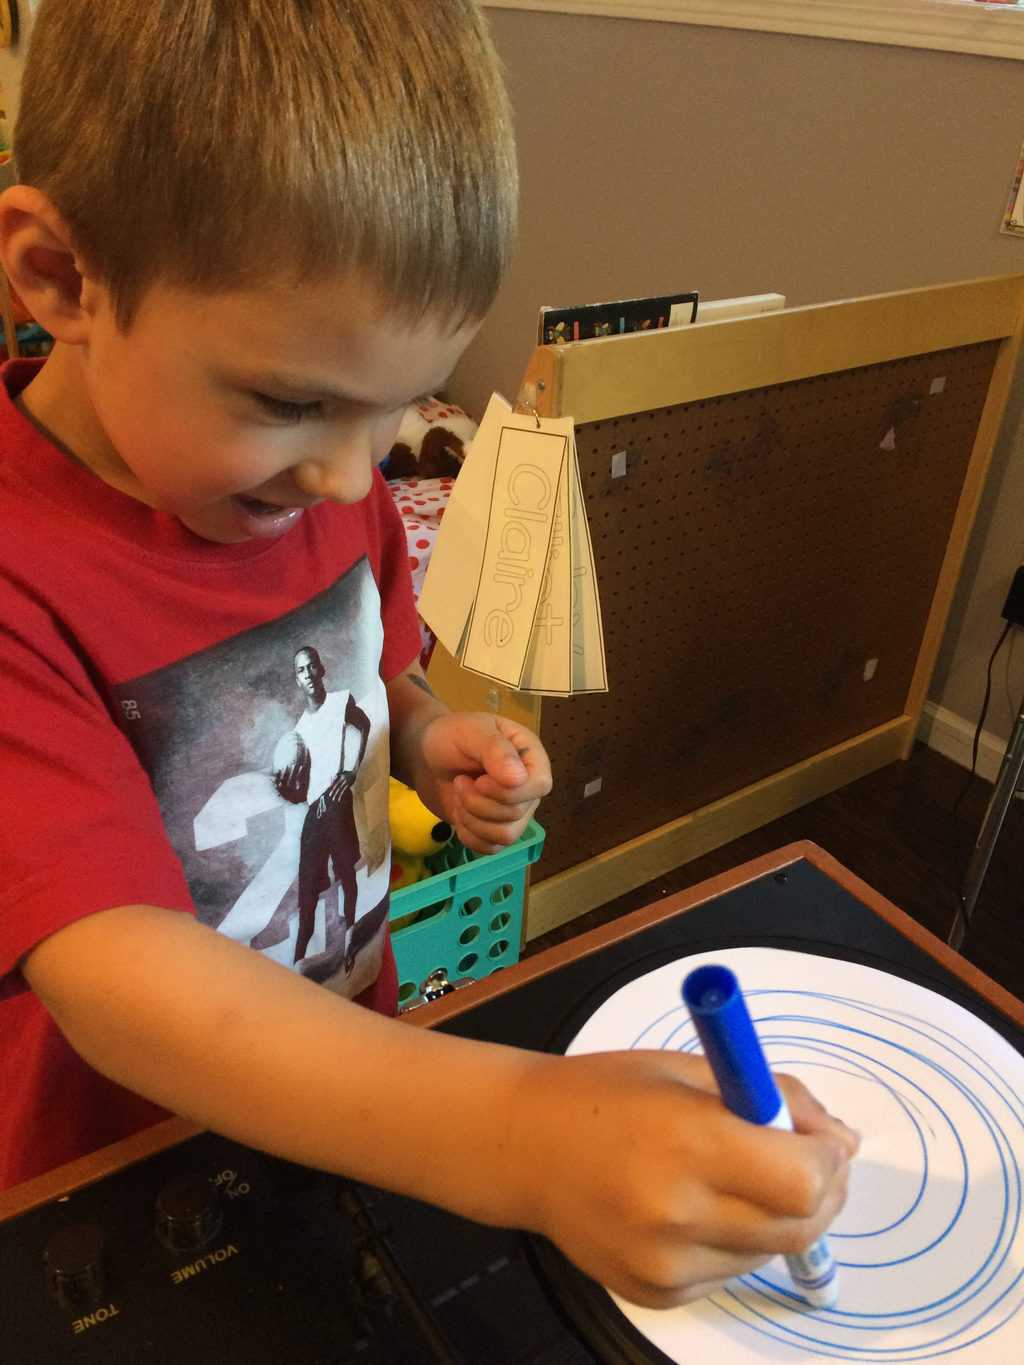 young boy with red shirt using a marker to make circles on paper